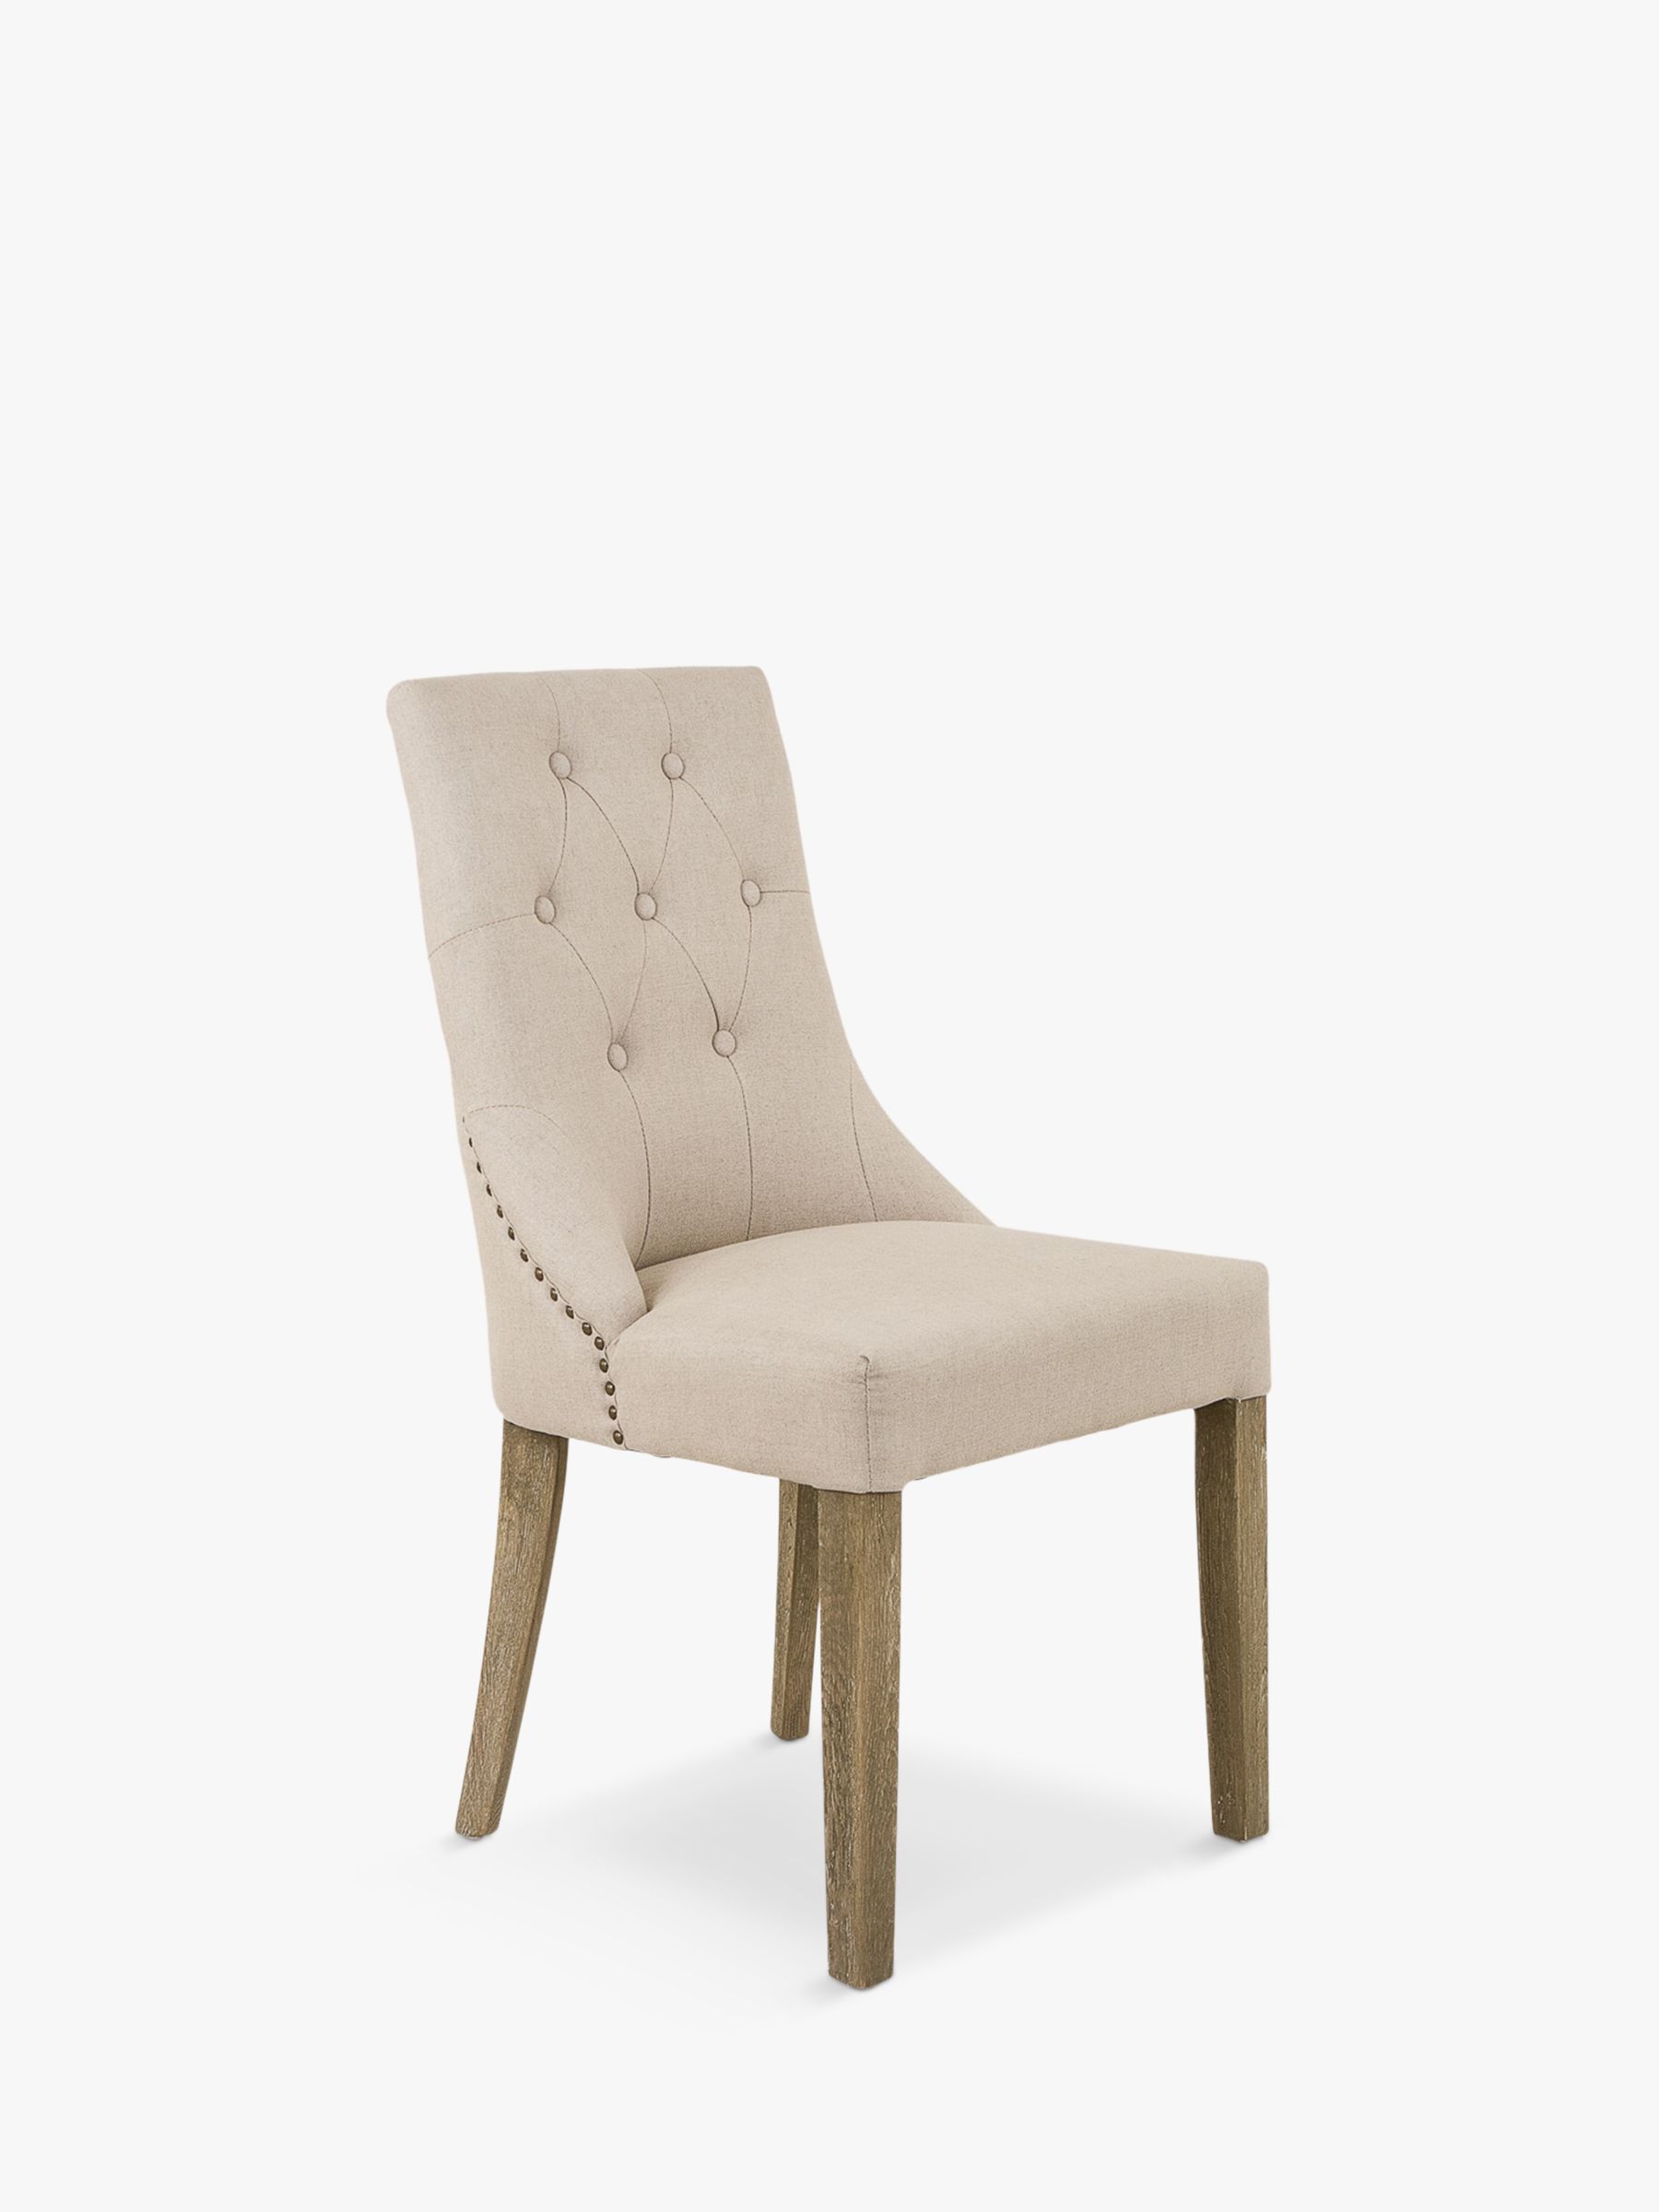 Photo of One.world st james oak wood stud detail dining chair